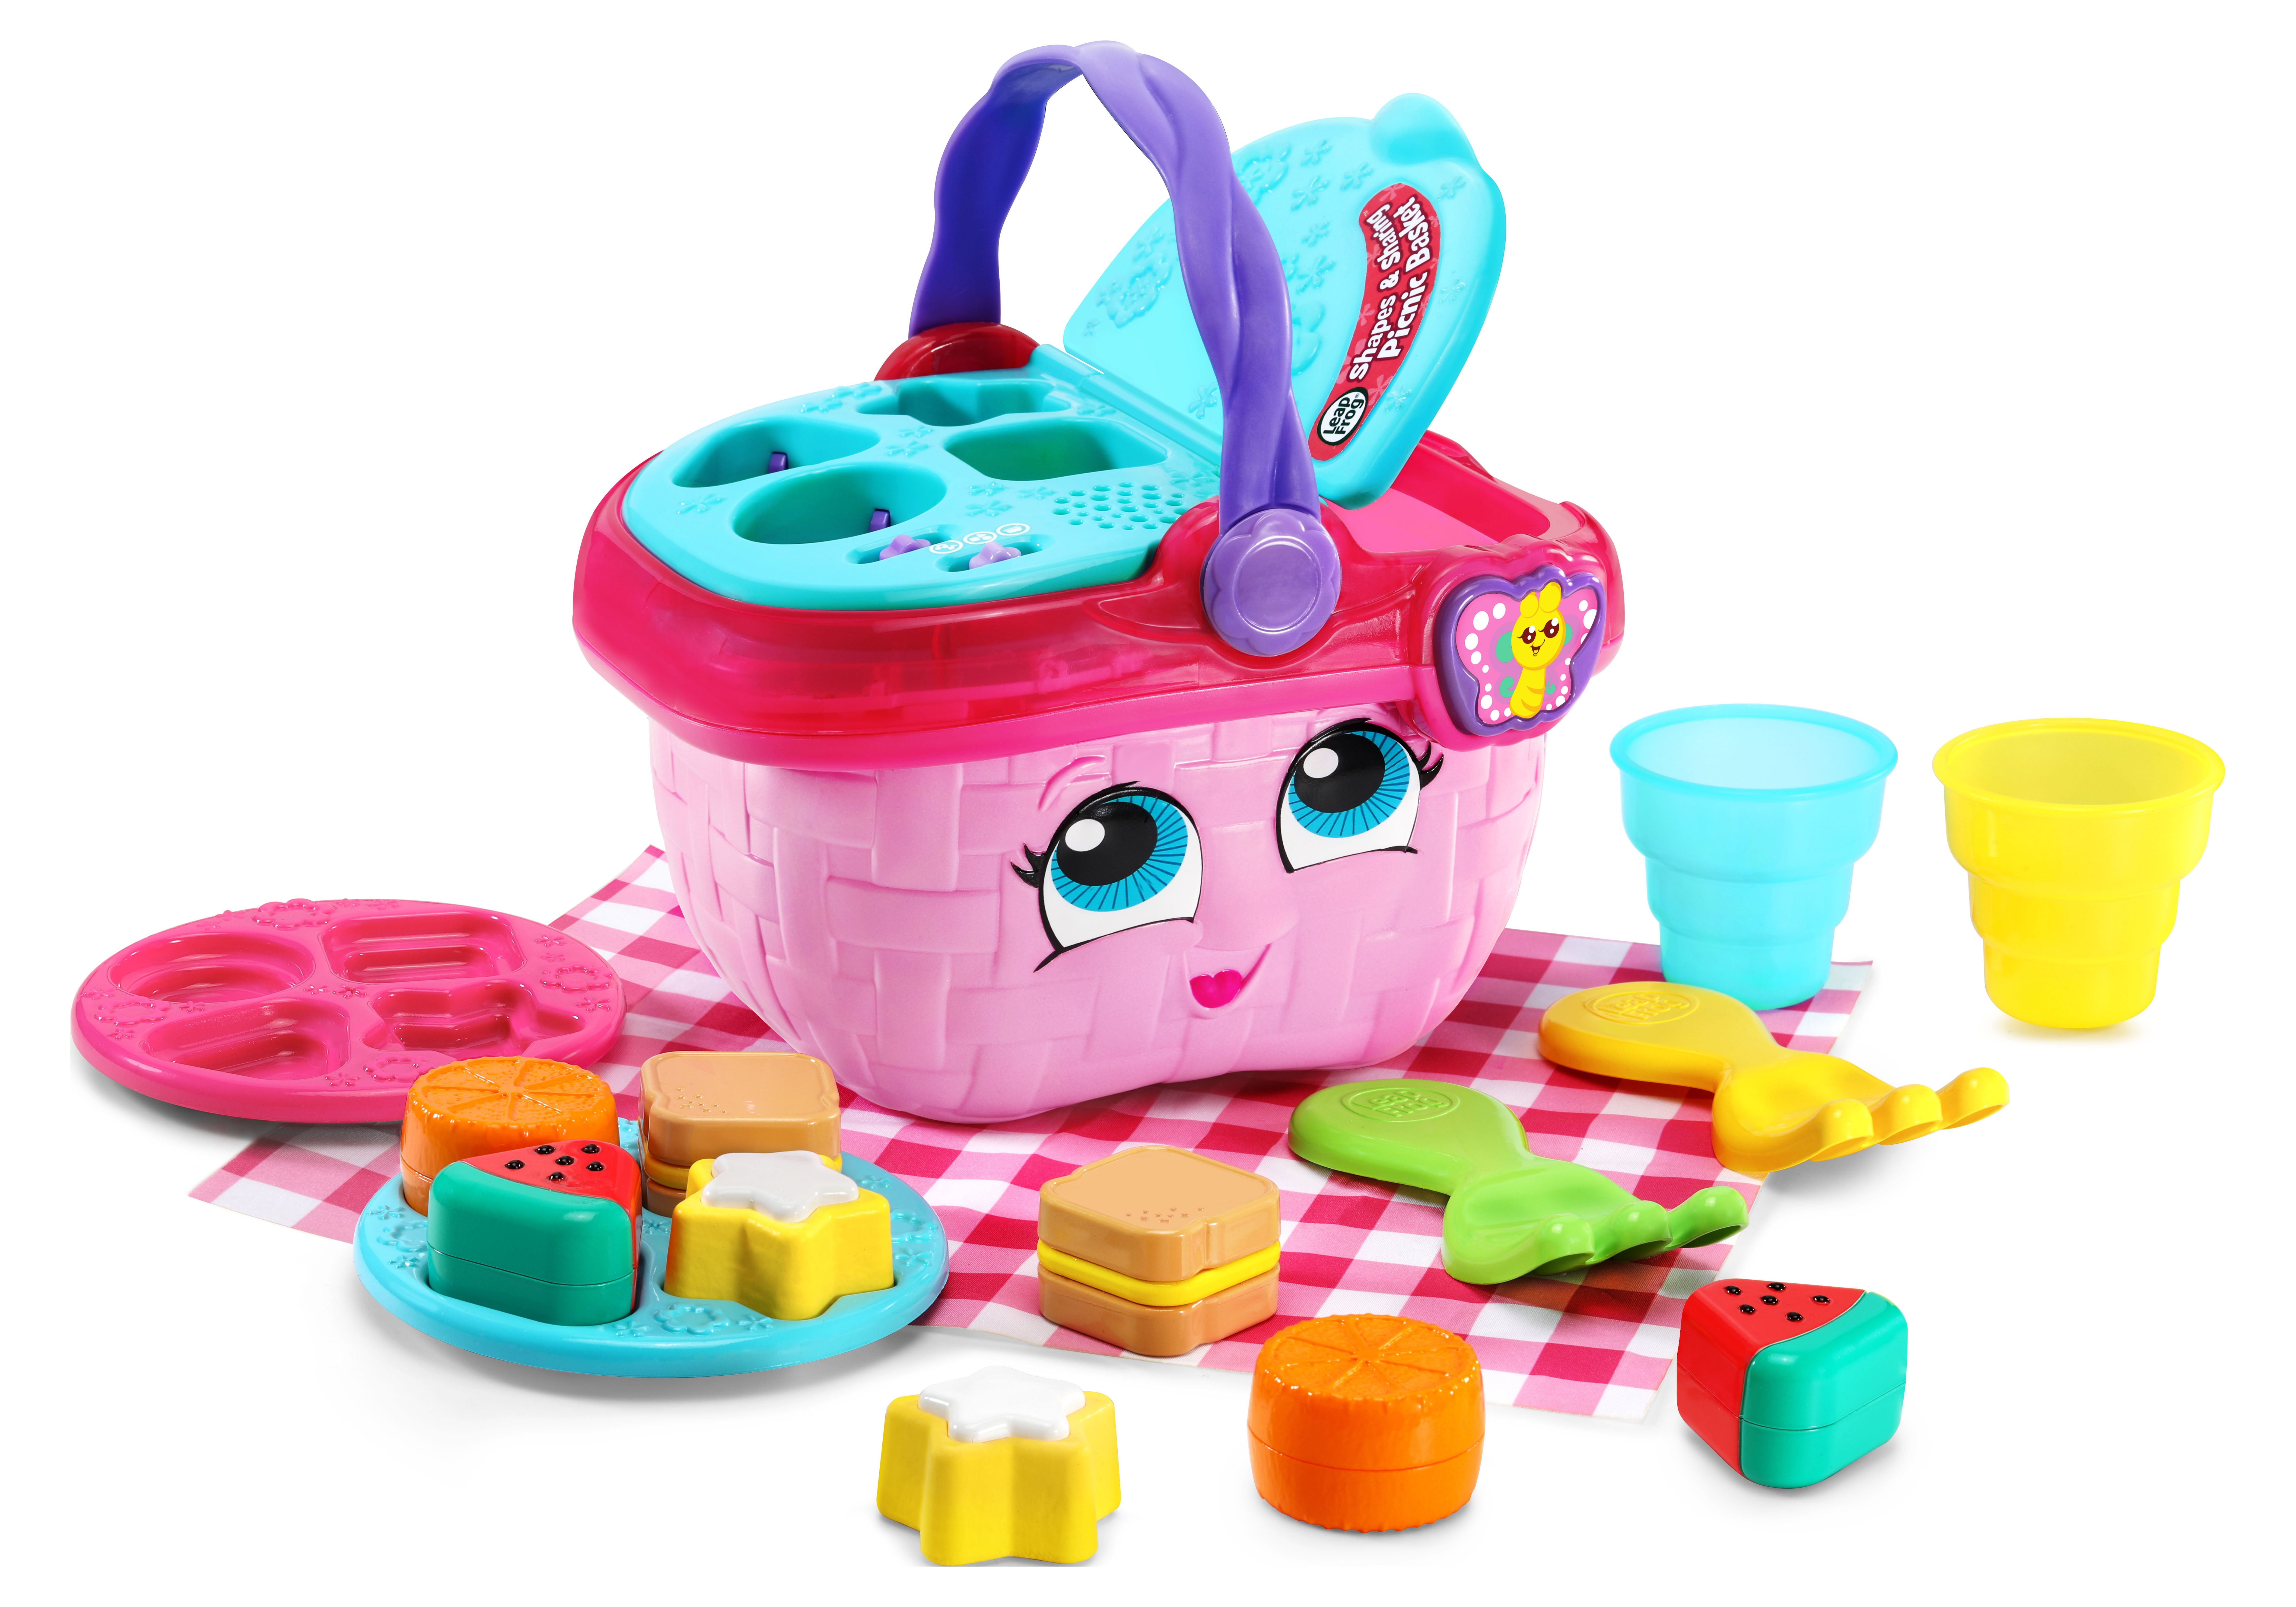 LeapFrog Shapes and Sharing Picnic Basket, Multicolor Role Play Toy for Infants - image 5 of 12